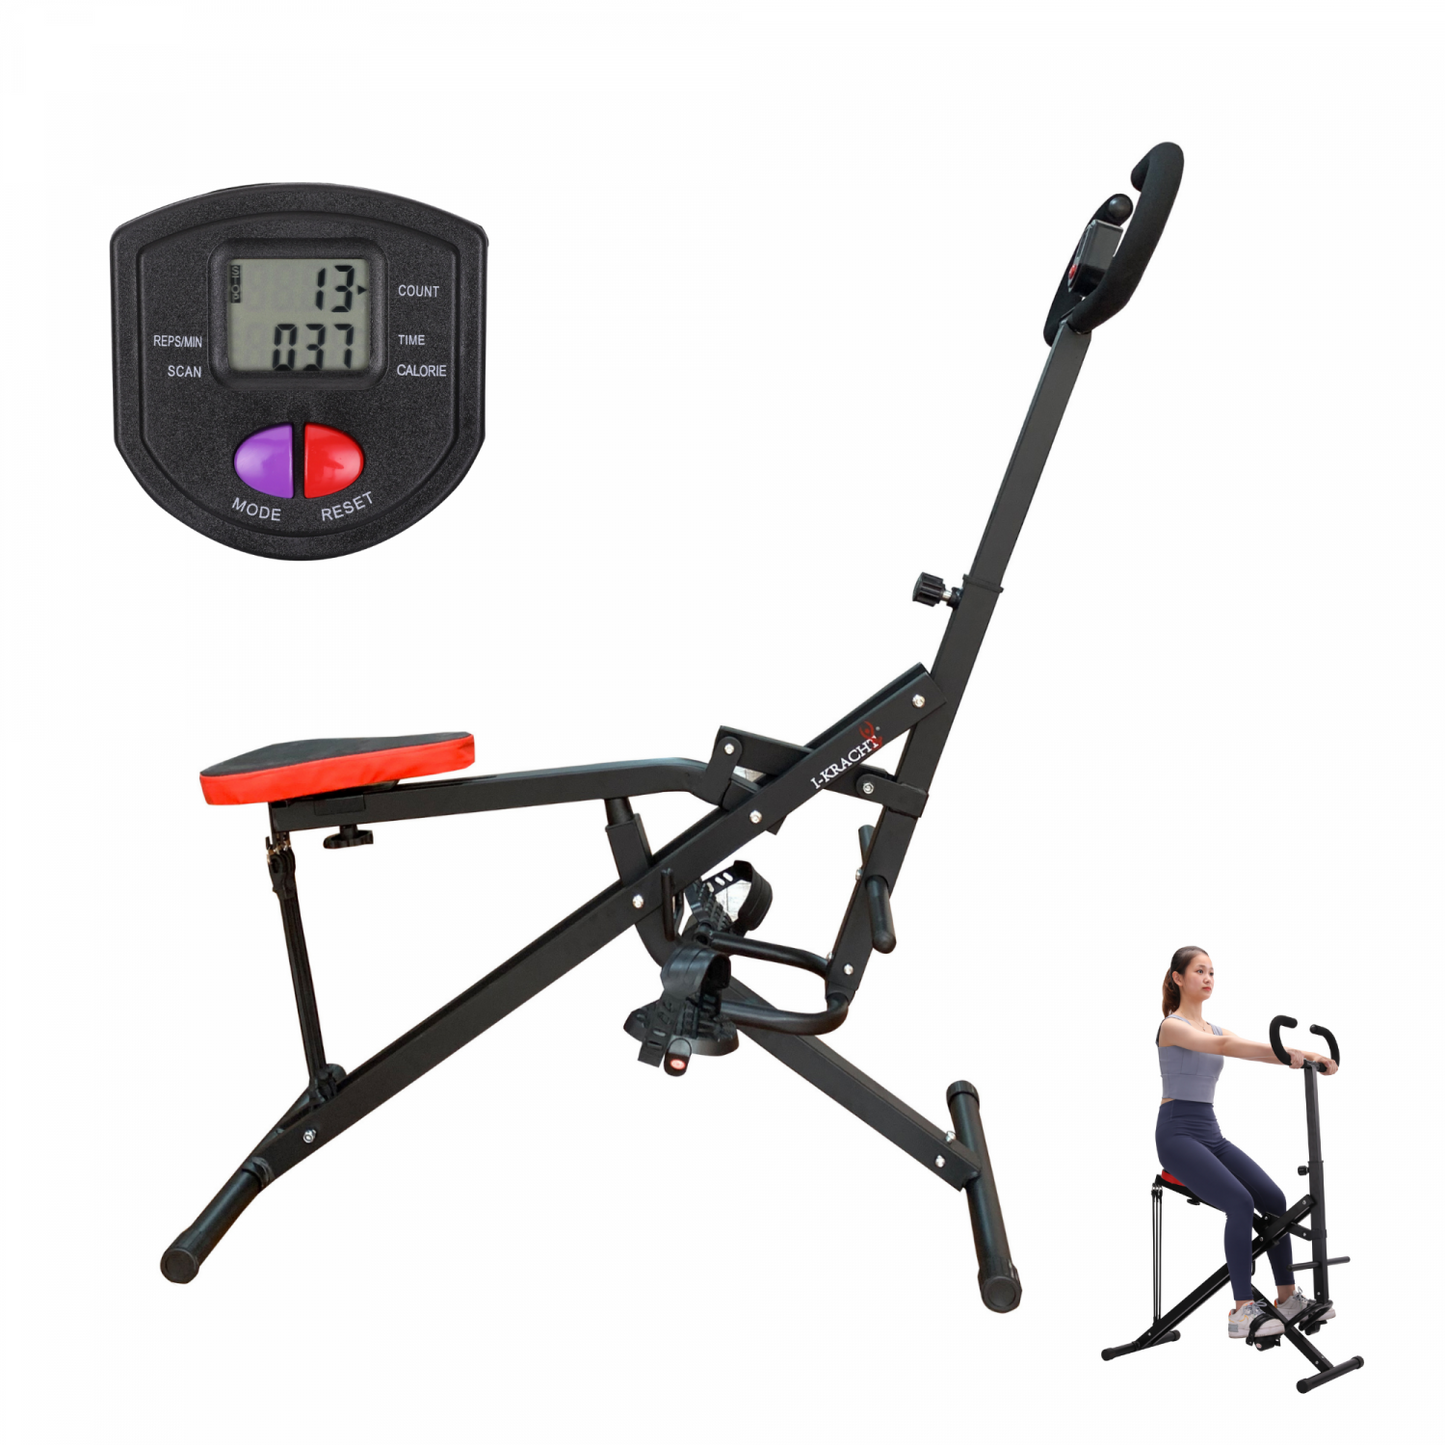 I-Kracht Total Fitness Crunch with Digital Monitor Black